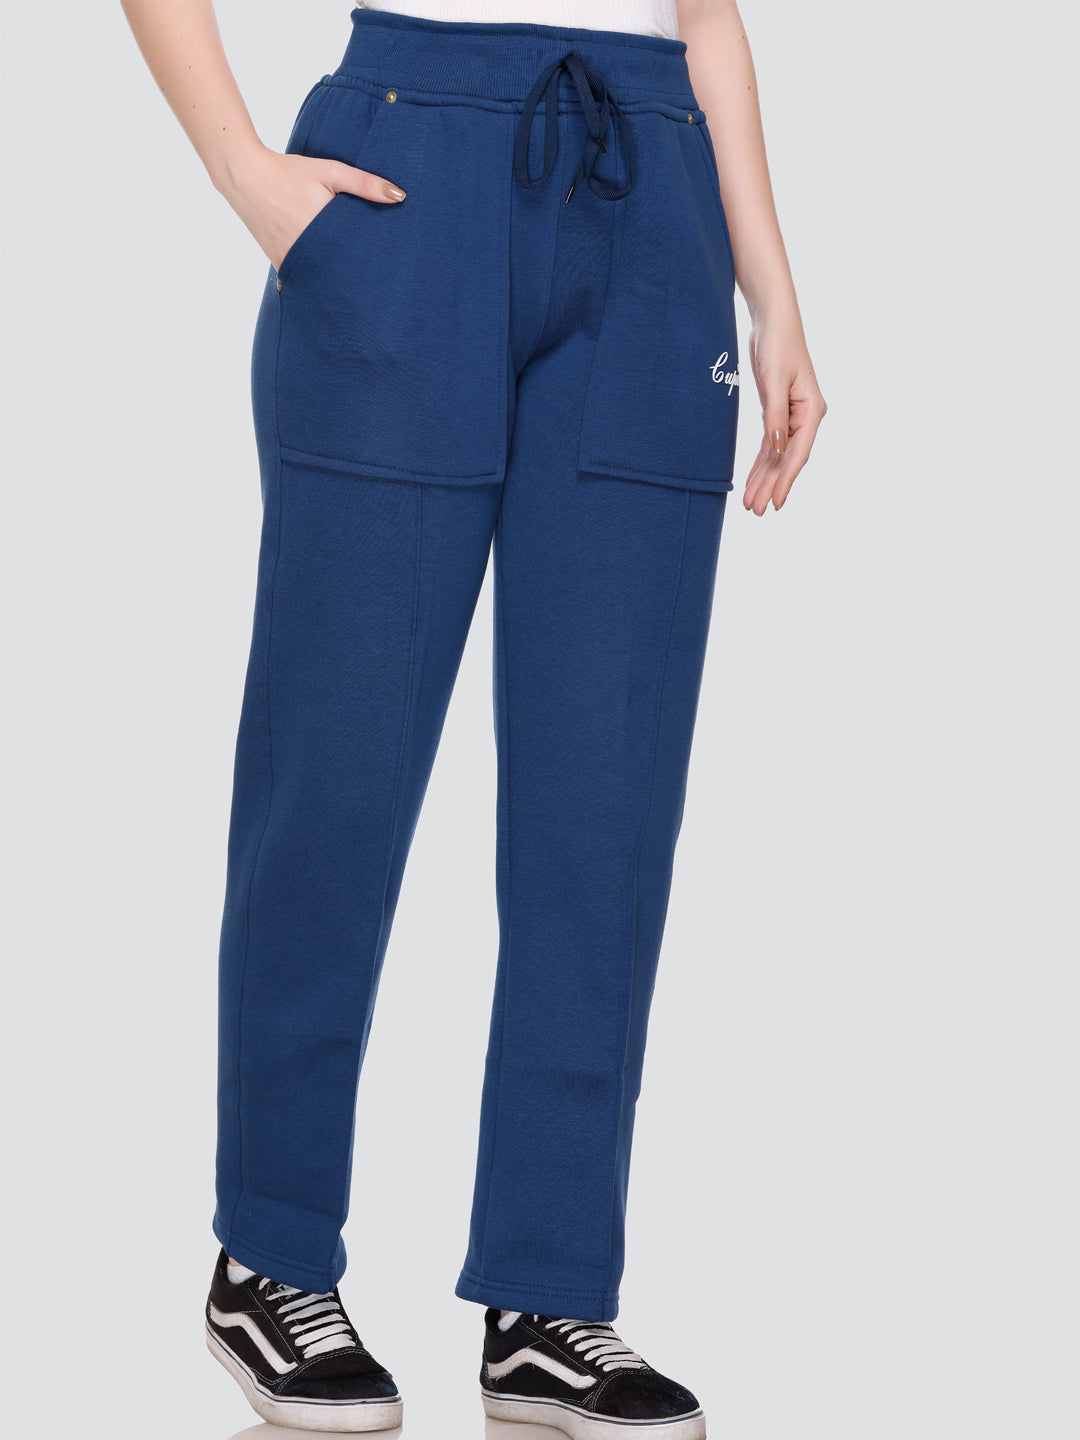 PUMA Power Pants Printed Women White Track Pants - Buy PUMA Power Pants  Printed Women White Track Pants Online at Best Prices in India |  Flipkart.com